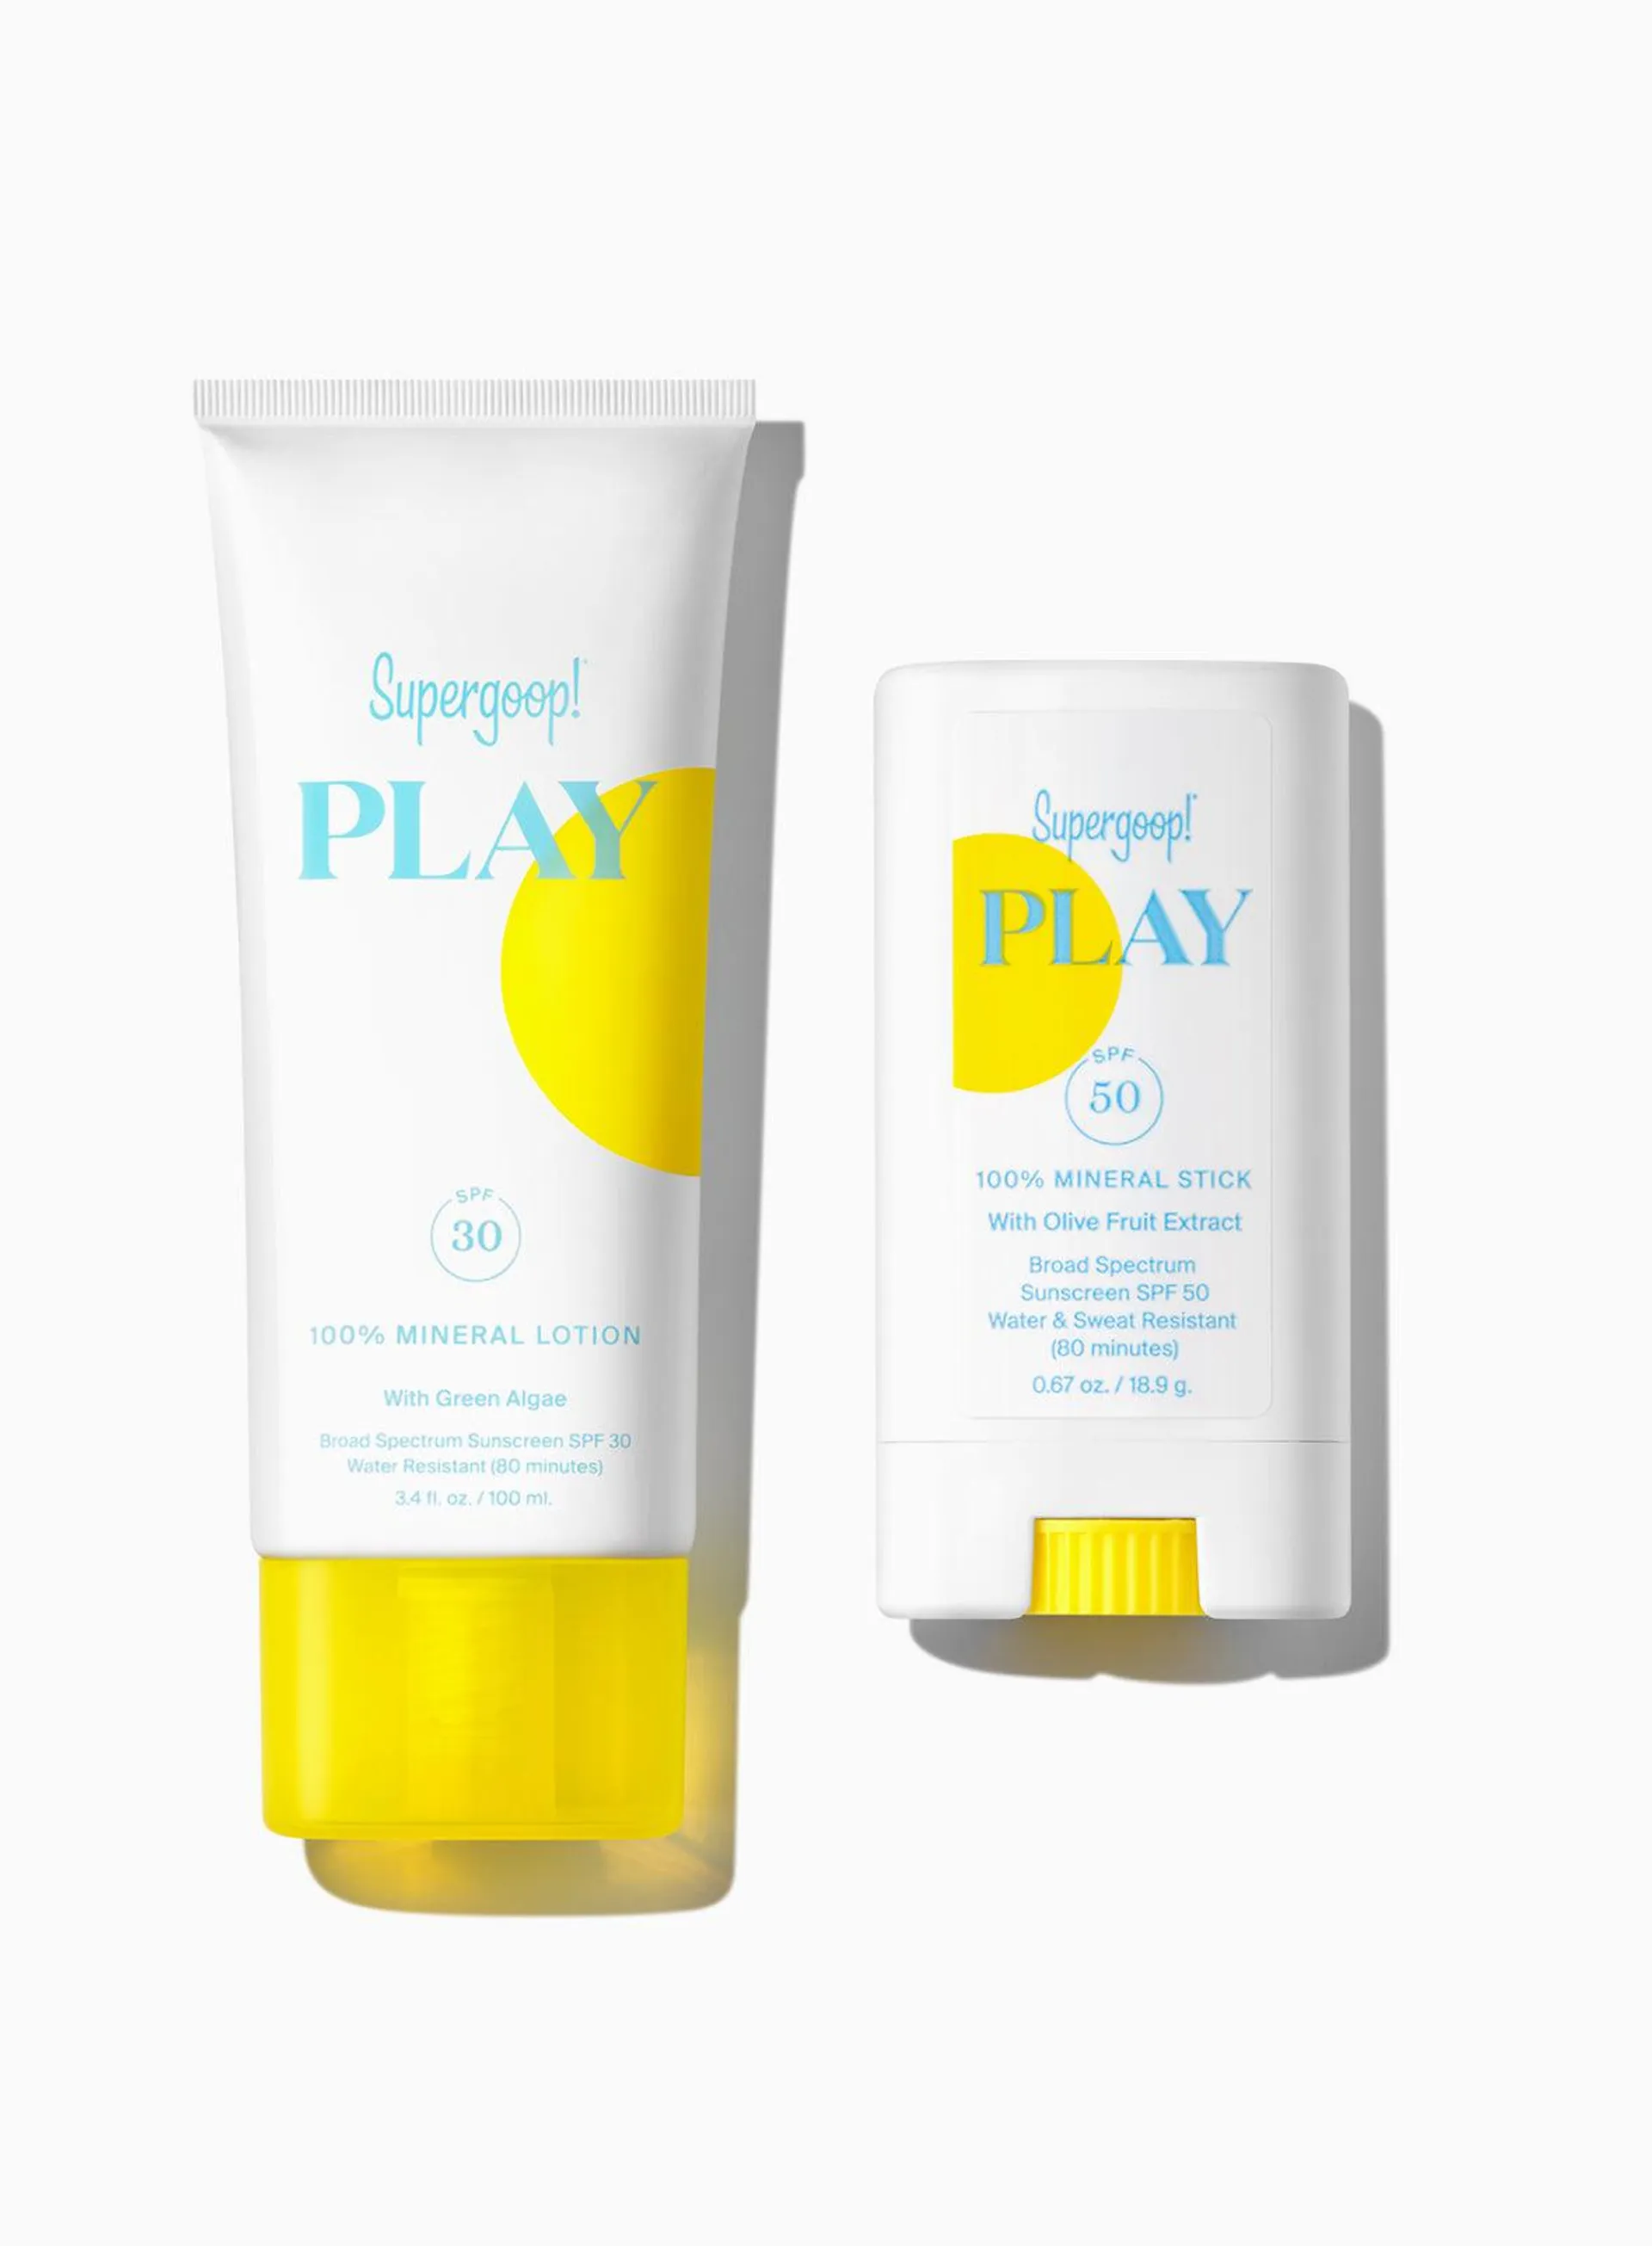 The PLAY Mineral Set